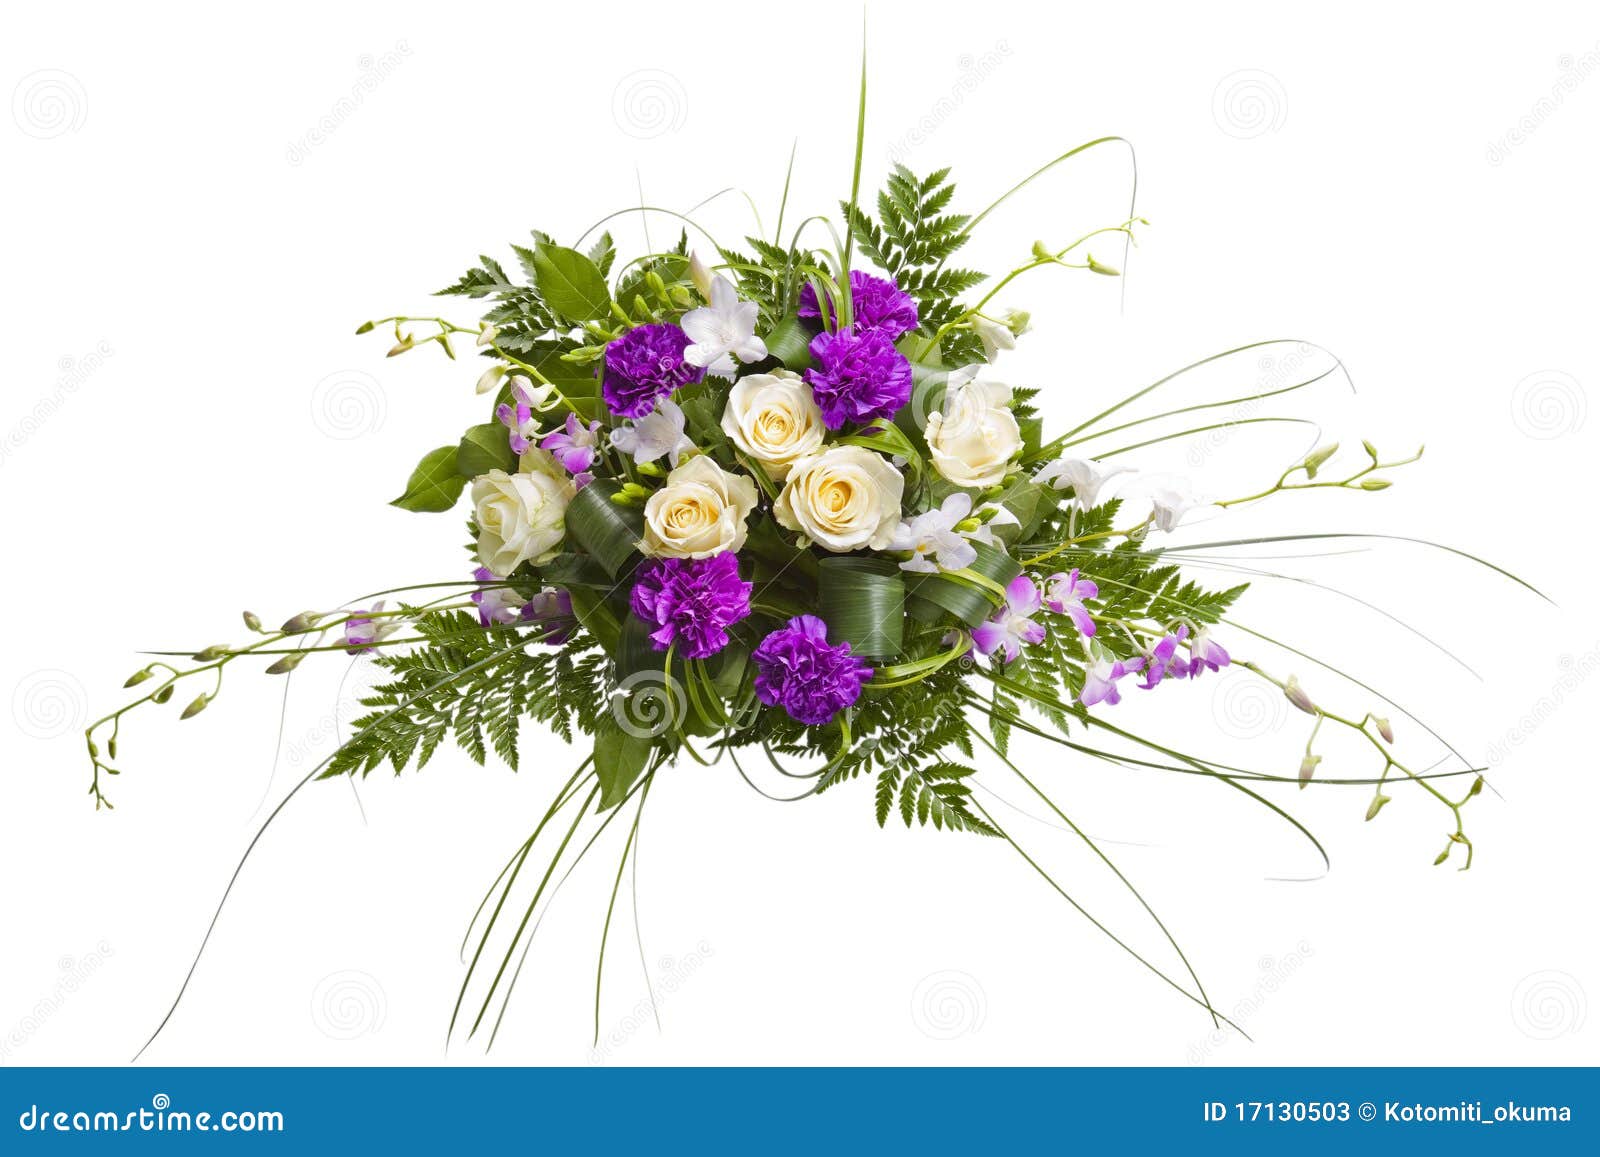 Bunch of flowers stock image. Image of bouquet, flowers - 17130503